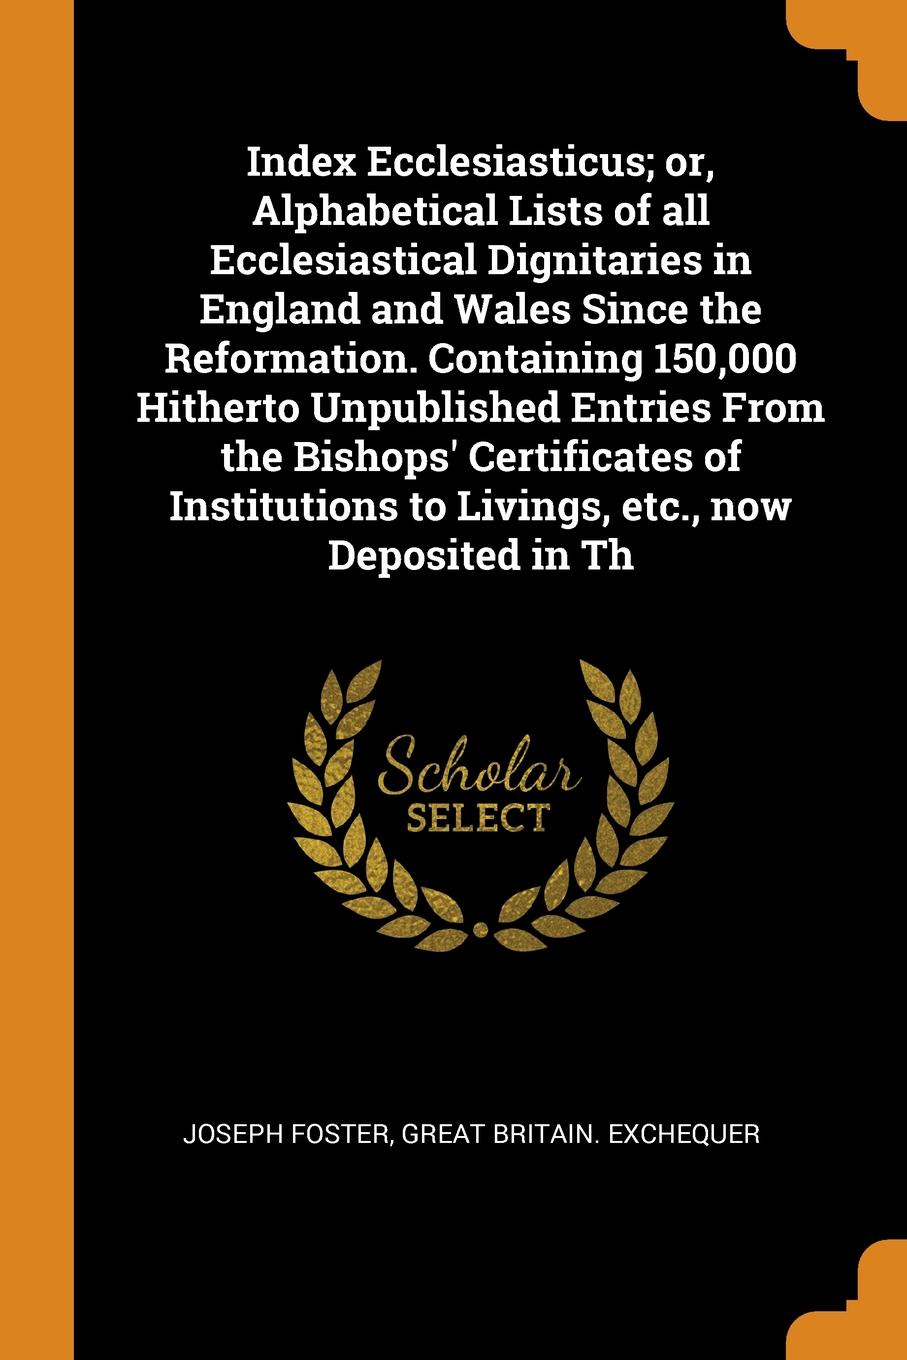 Index Ecclesiasticus; or, Alphabetical Lists of all Ecclesiastical Dignitaries in England and Wales Since the Reformation. Containing 150,000 Hitherto Unpublished Entries From the Bishops` Certificates of Institutions to Livings, etc., now Deposit...